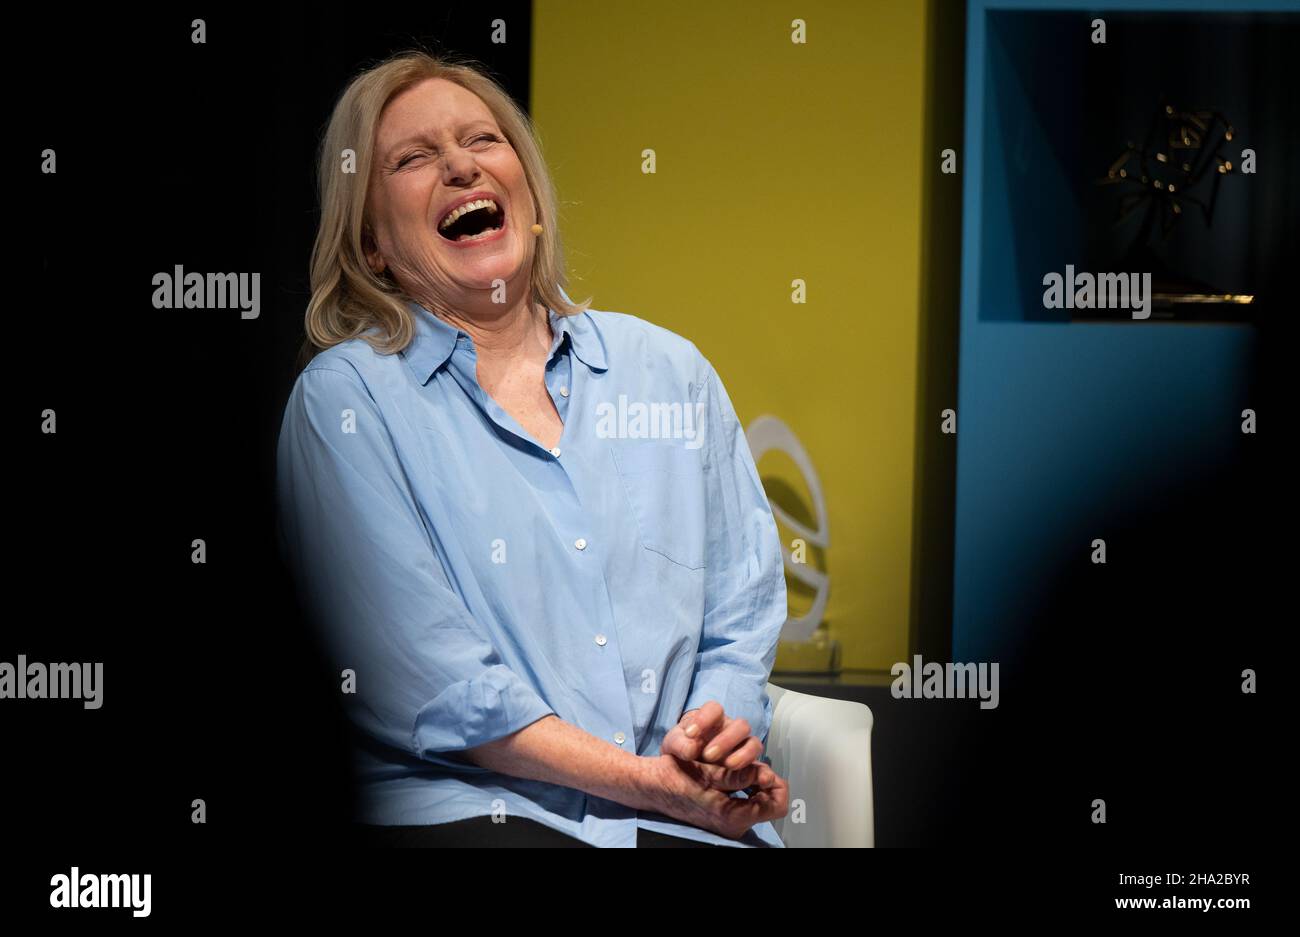 Berlin, Germany. 09th Dec, 2021. Maren Kroymann, actress and comedienne, laughs during the recording of the show 'Fernsehsalon' at the Deutsche Kinemathek - Museum für Film und Fernsehen. Kroymann is the inaugural guest of the new format 'Fernsehsalon', which can be seen online from 13.01.2022 on the website of the Kinemathek, on the Berlin channel Alex and on other platforms. Credit: Monika Skolimowska/dpa-Zentralbild/dpa/Alamy Live News Stock Photo